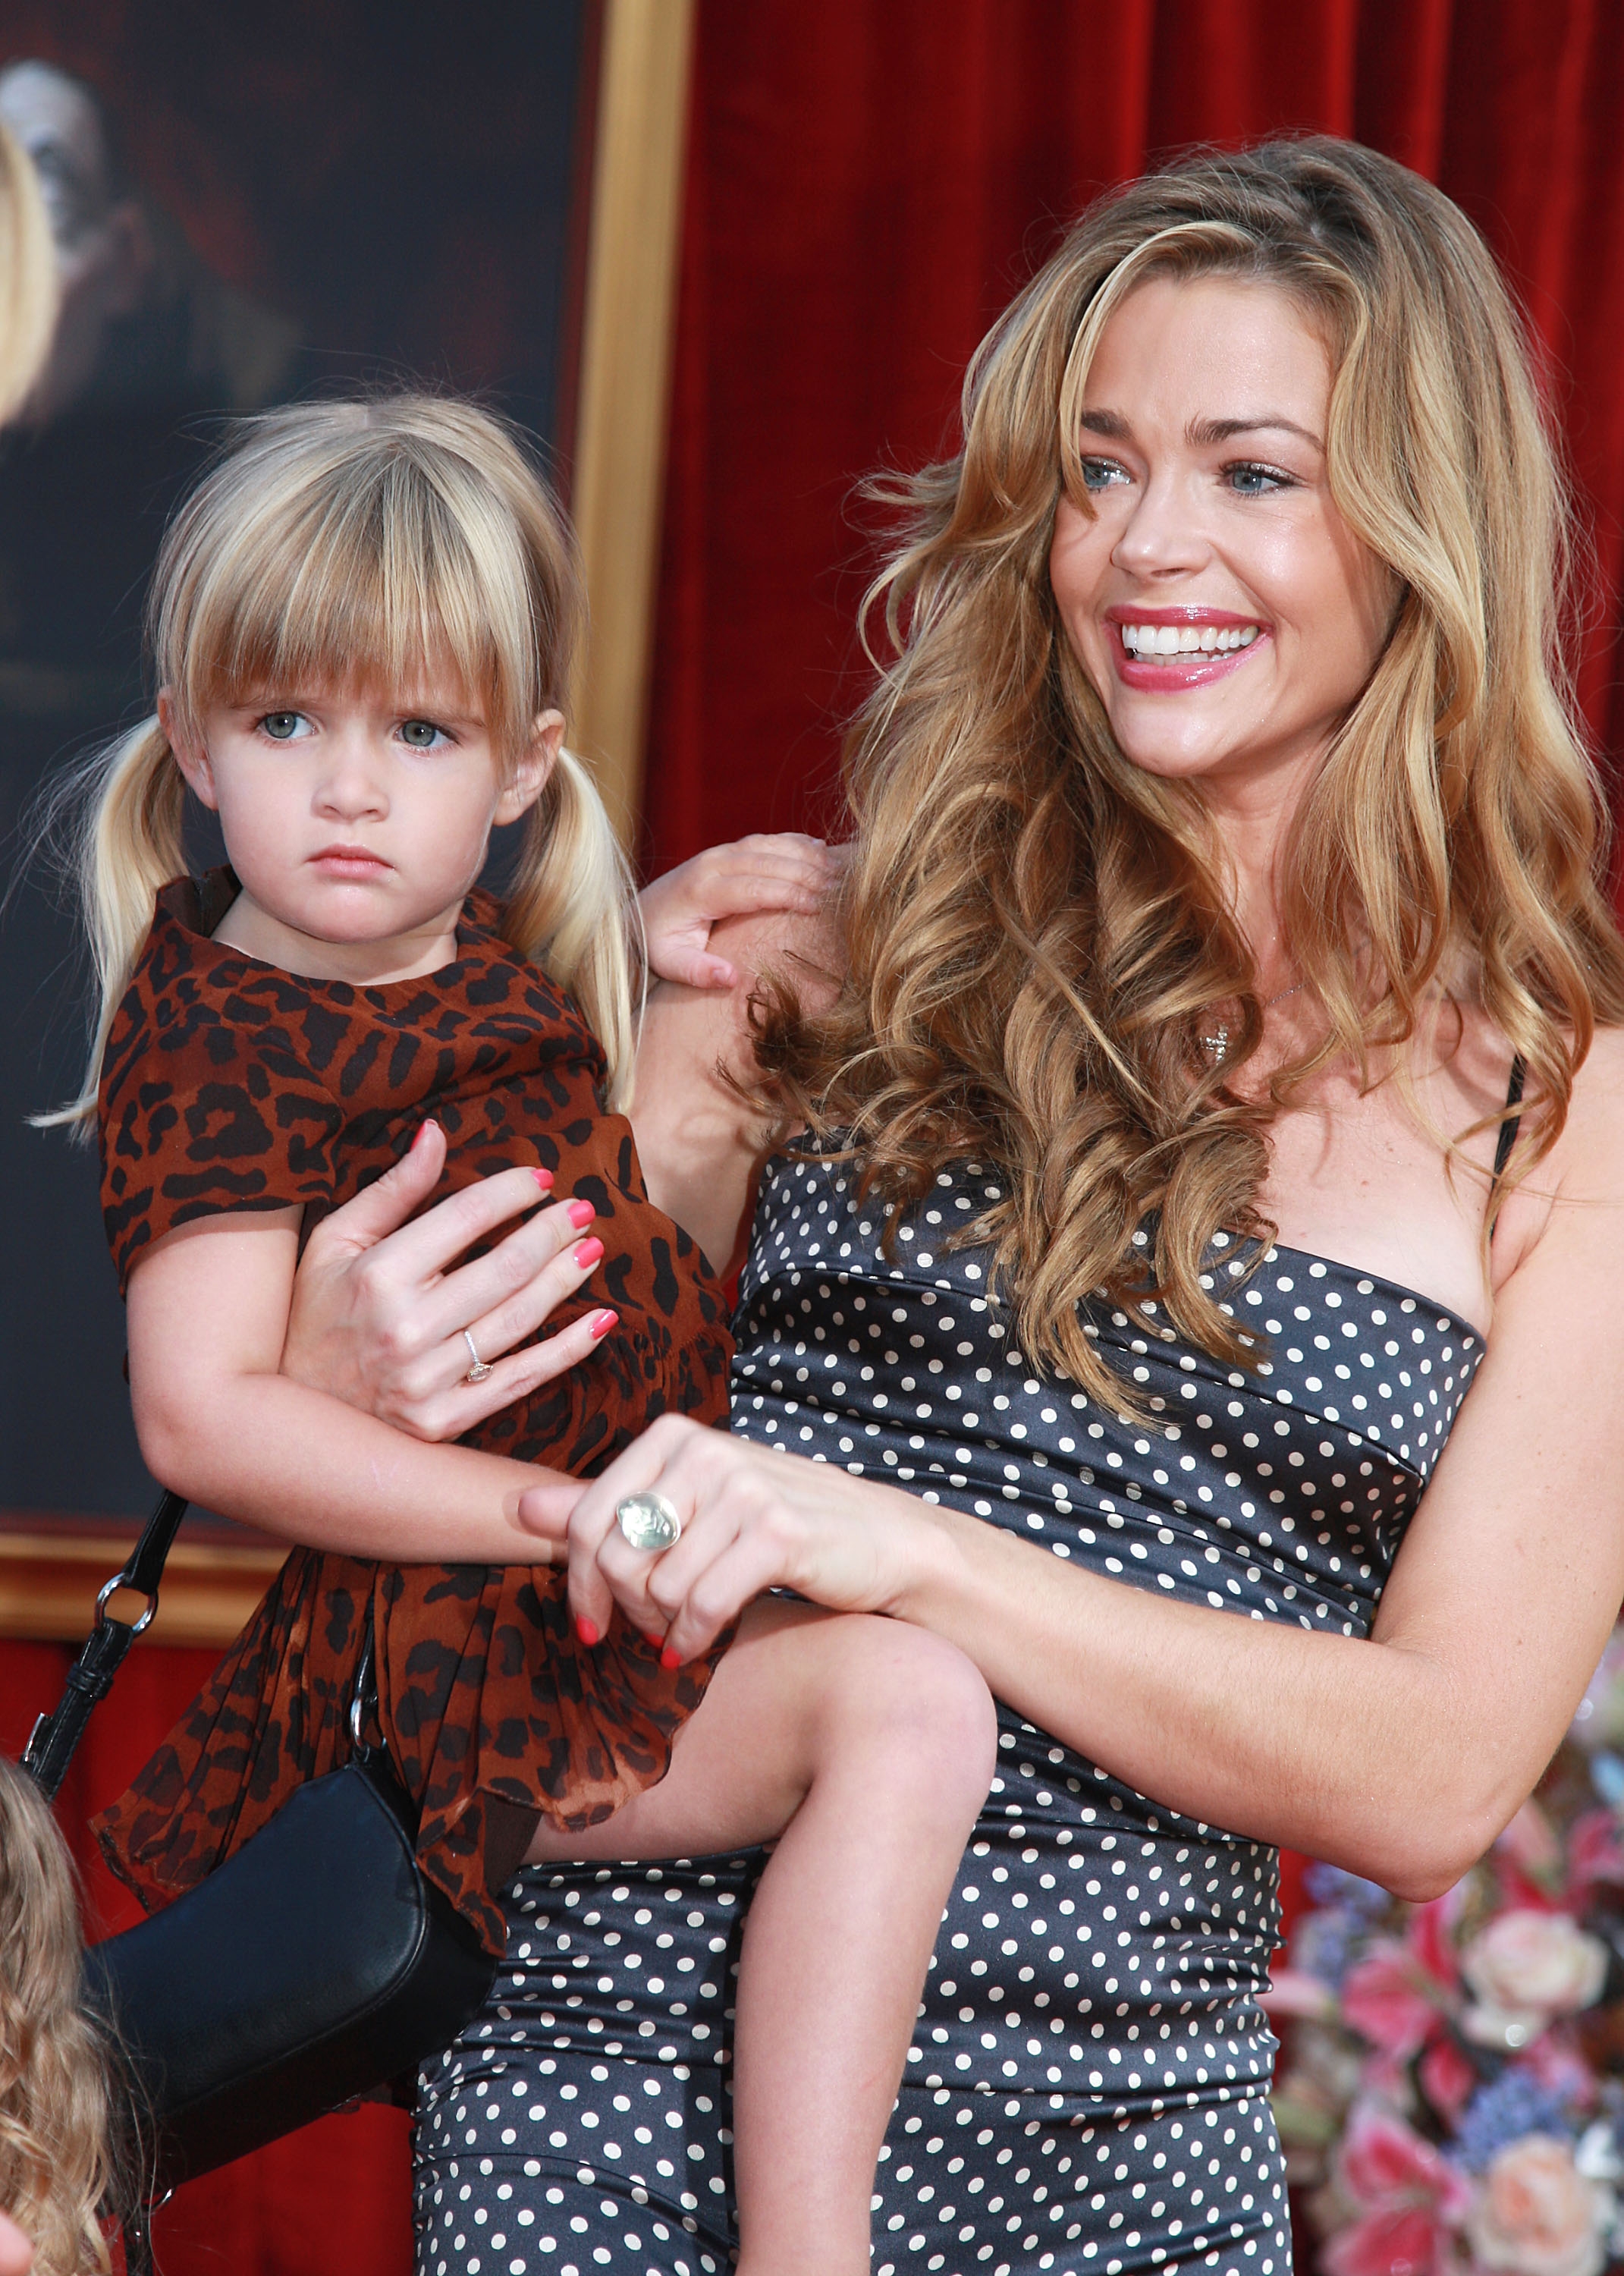 Denise Richards and Sam Sheen in Los Angeles, California on June 22, 2007 | Source: Getty Images